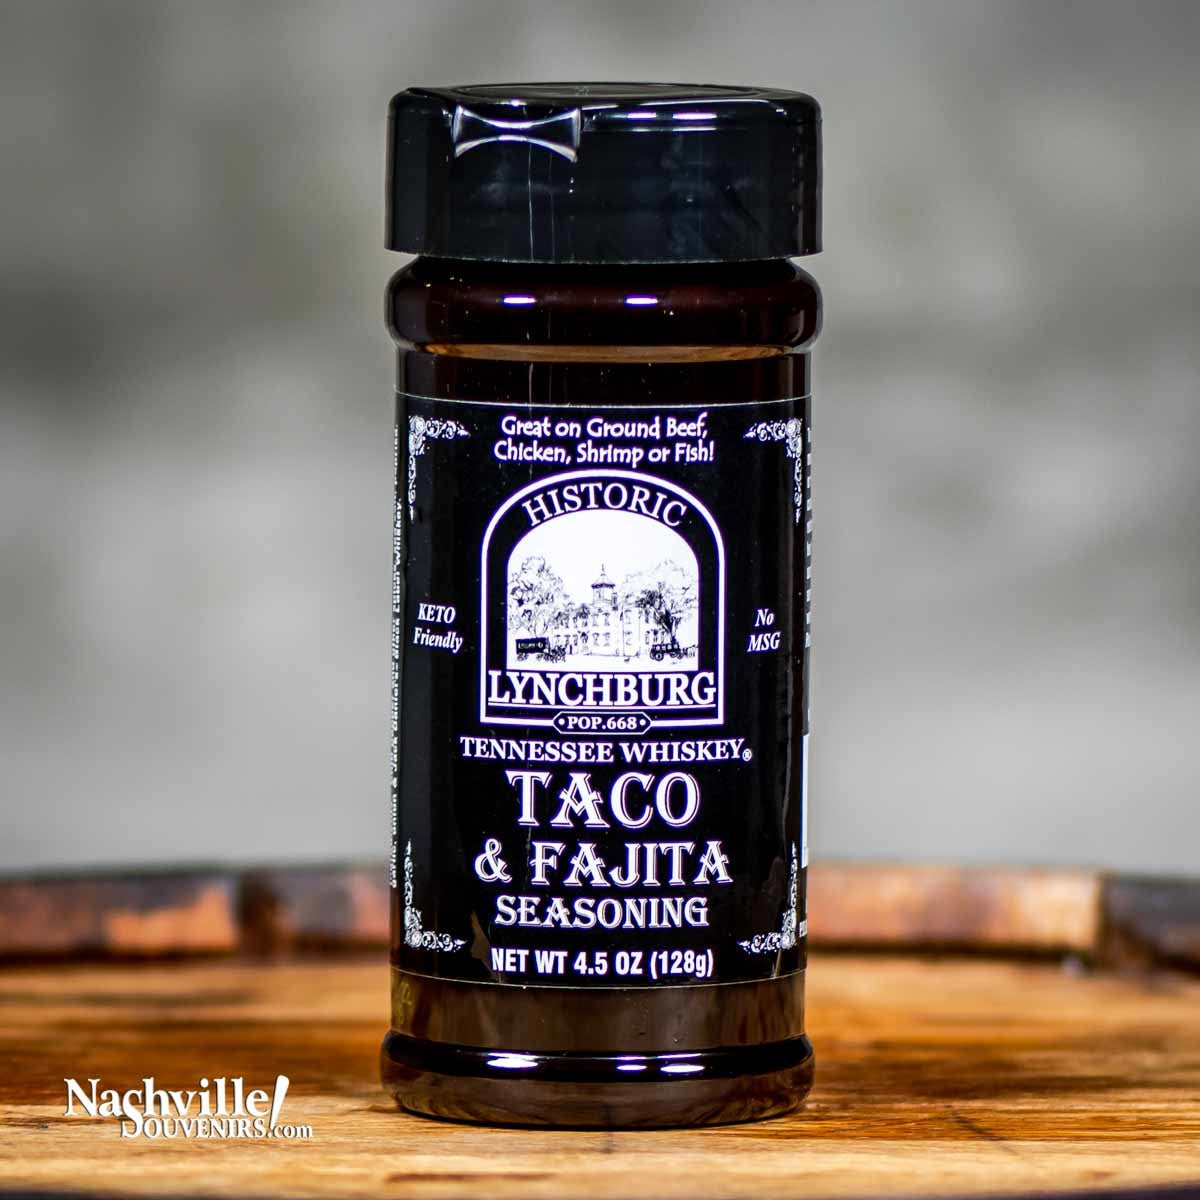 It's time to shake up your old spice habits and try some Historic Lynchburg Taco & Fajita Seasoning. Add some zing and "Jack Up" your tacos and fajitas!